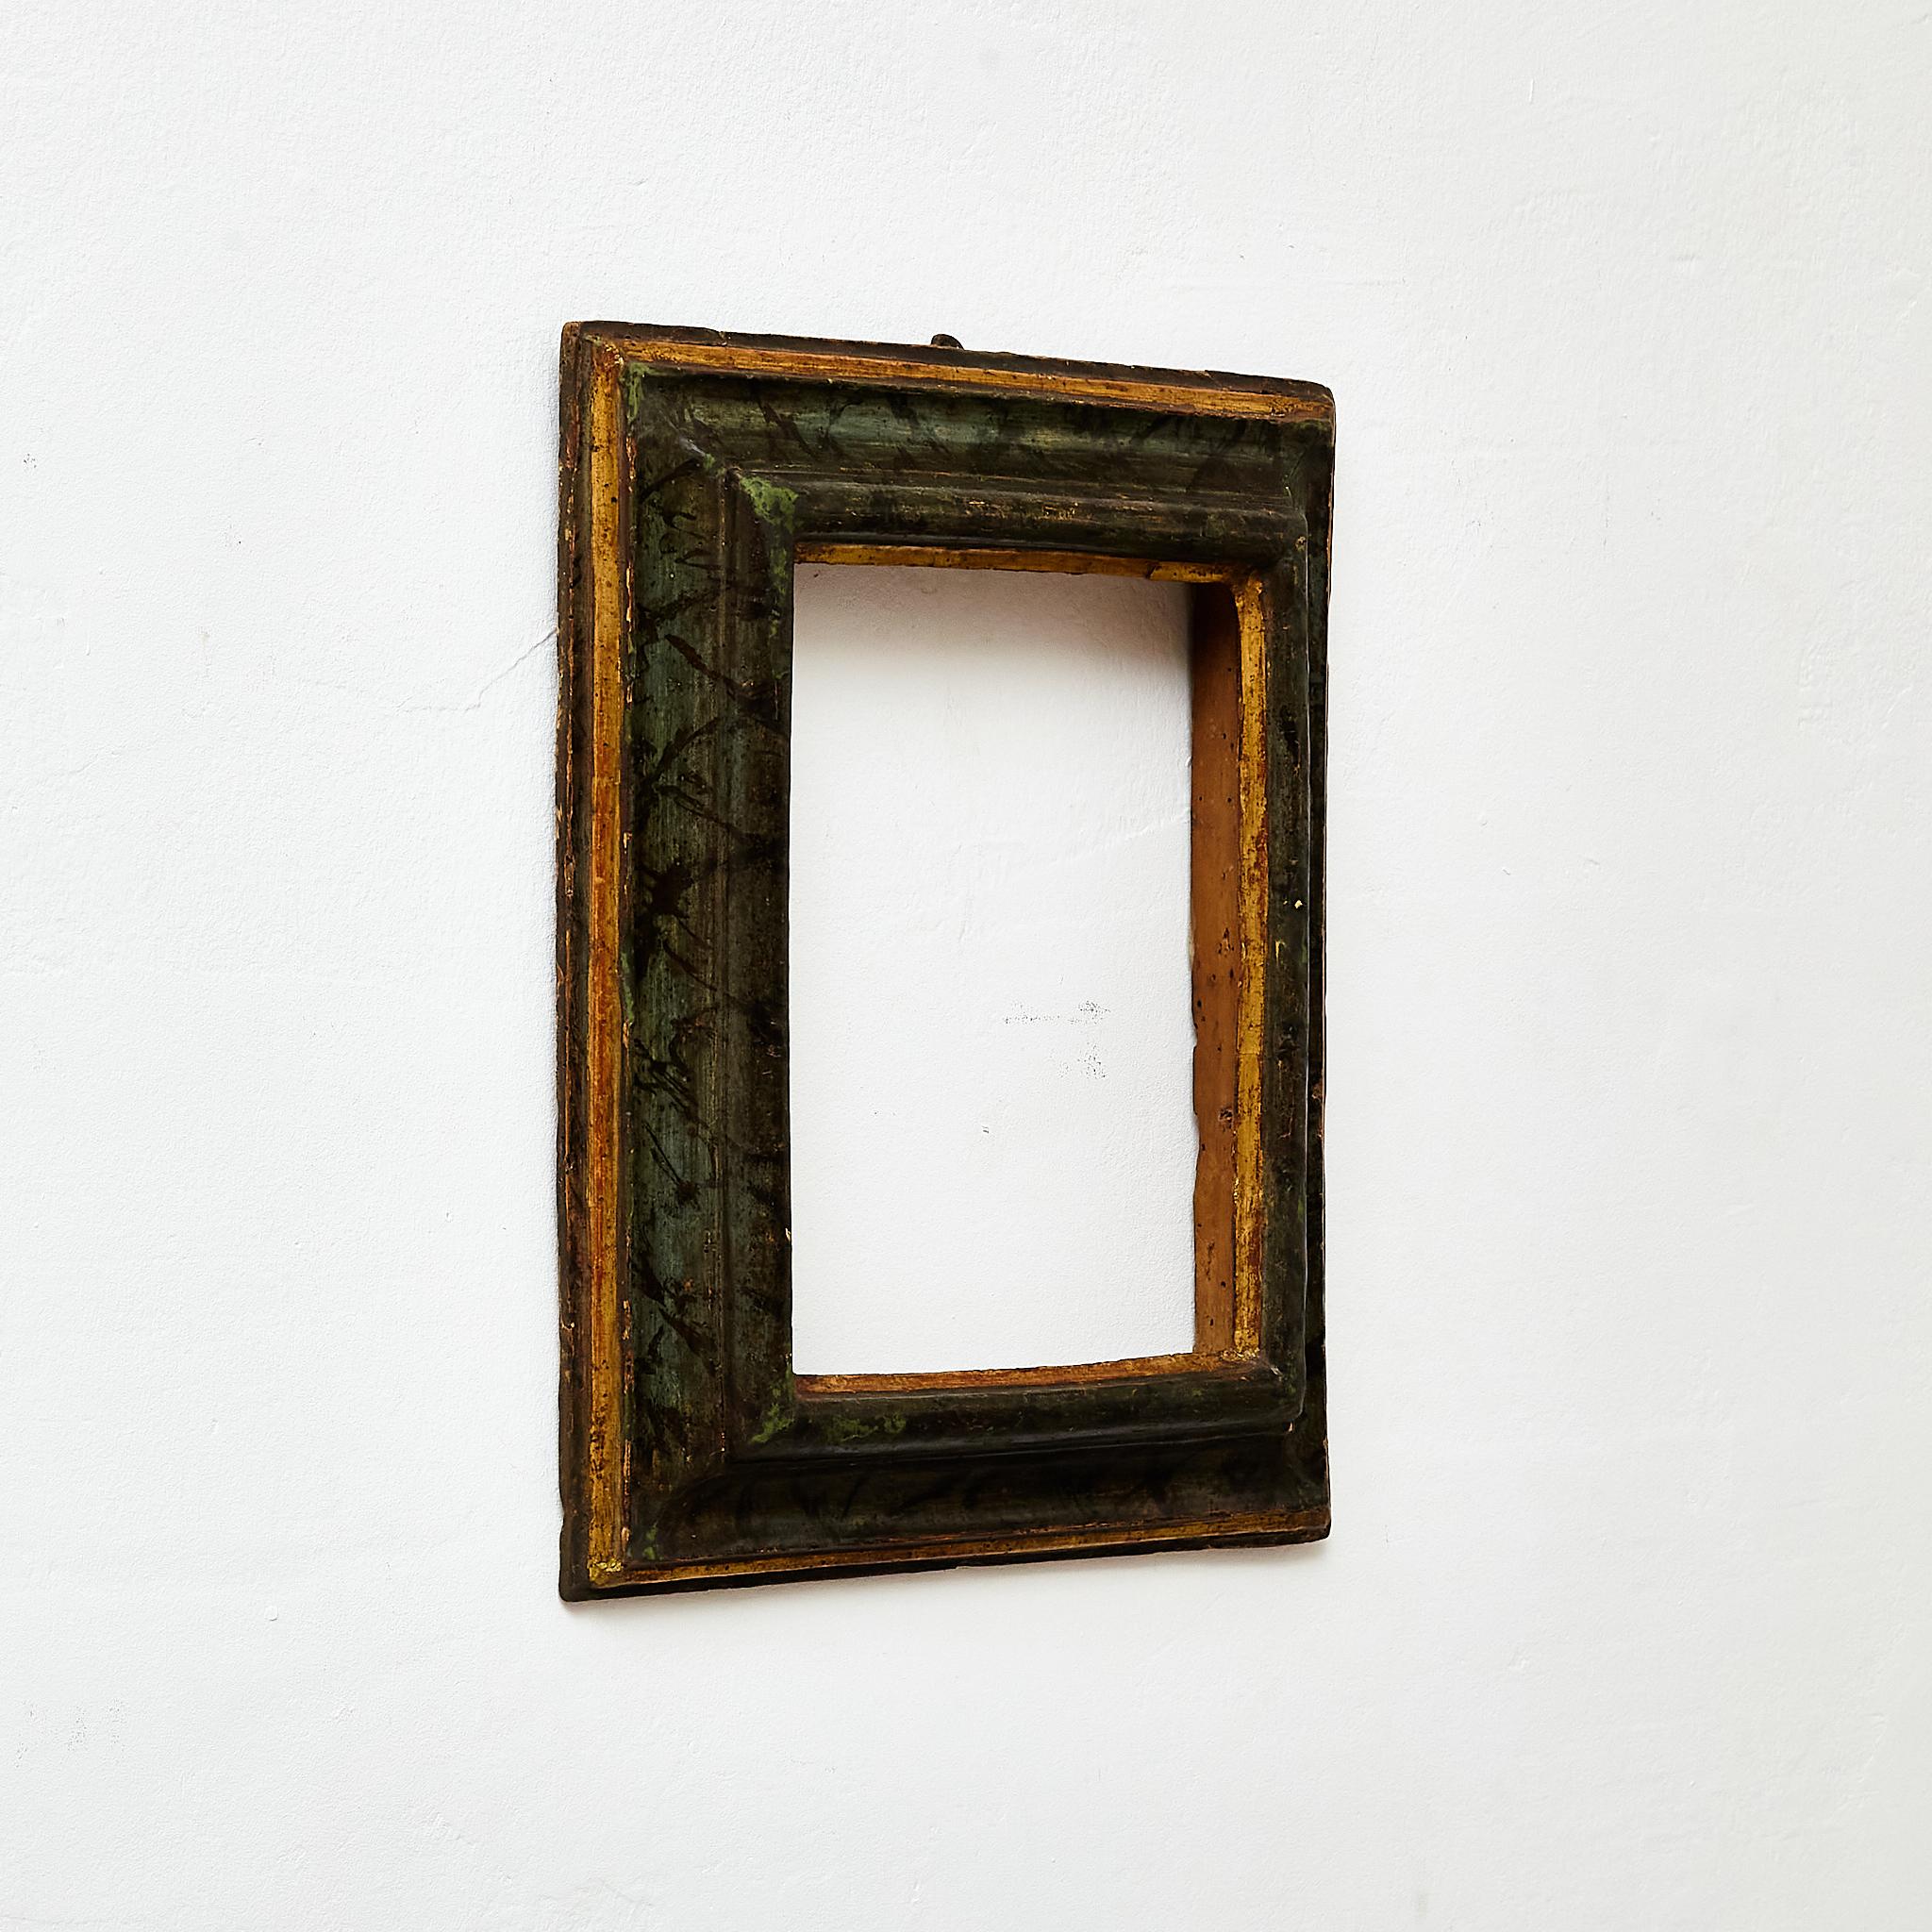 Antique Handpainted Wood Frame.

Manufactured France, circa 1950.

Materials:
Wood

Dimensions: 
D 6 x W 37 cm x H 44.5 cm

In original condition, with minor wear consistent with age and use, preserving a beautiful patina.

Important information